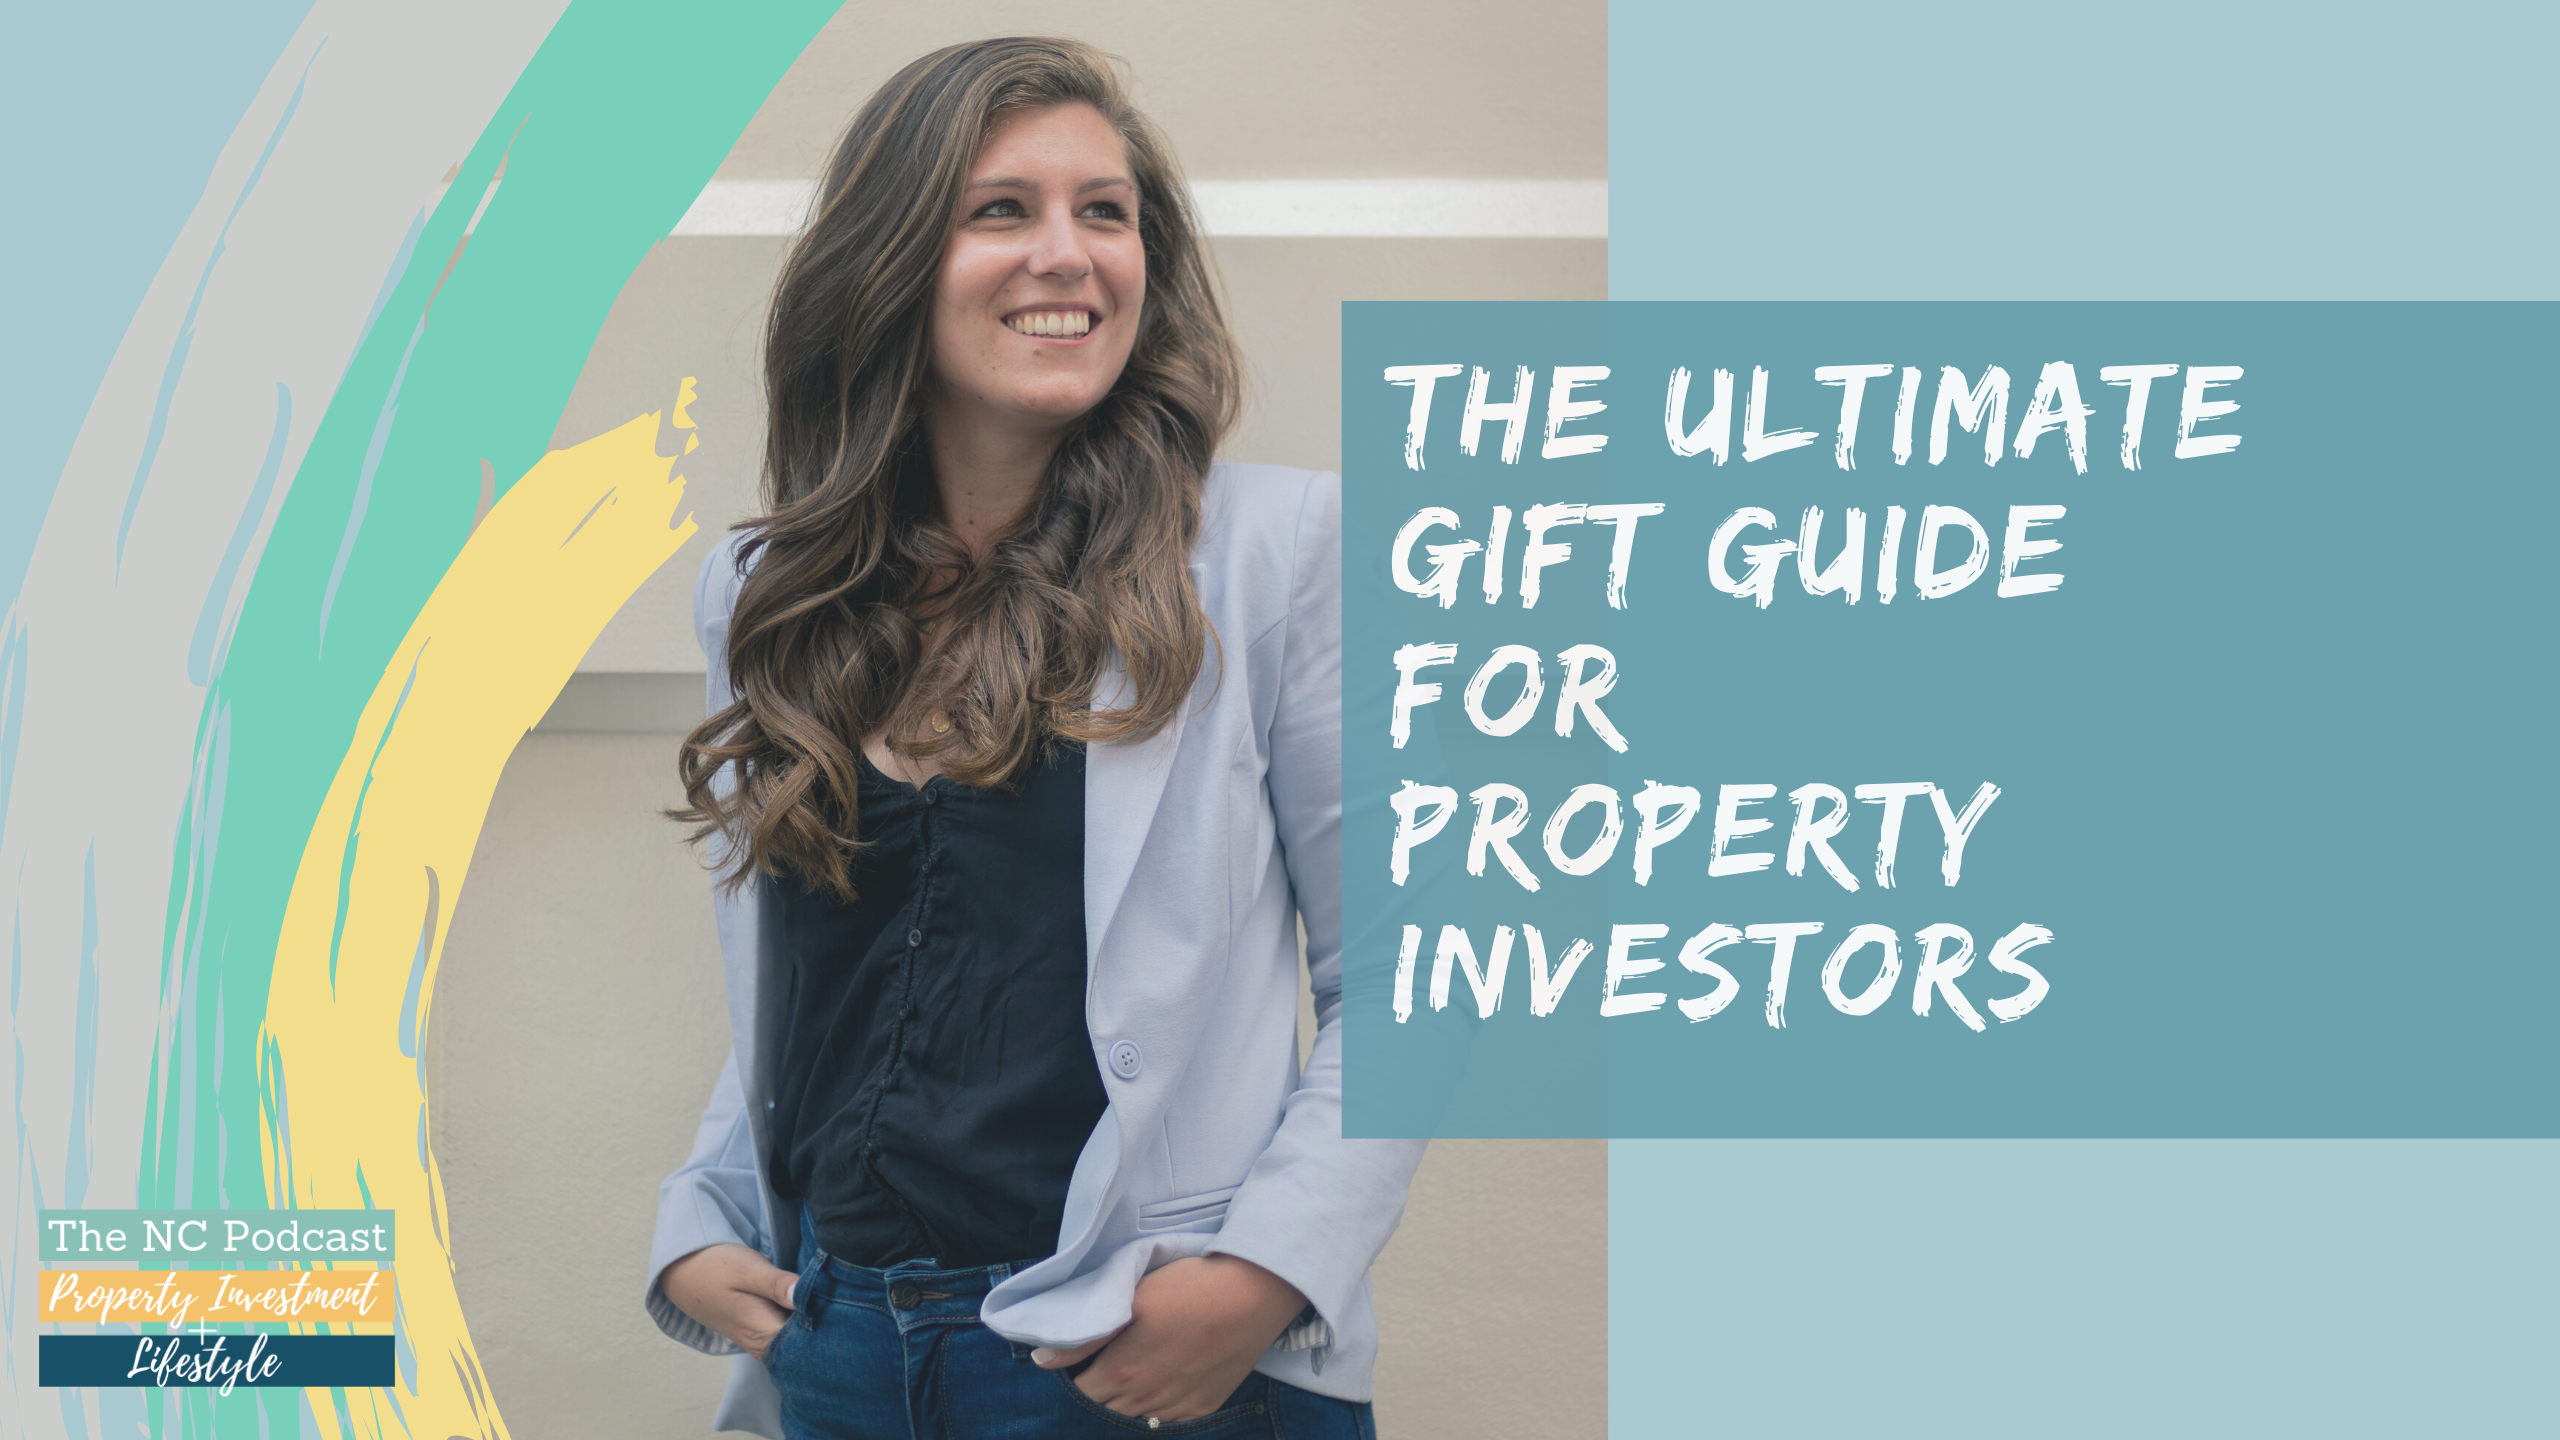 The ULTIMATE Gift Guide for Property Investors